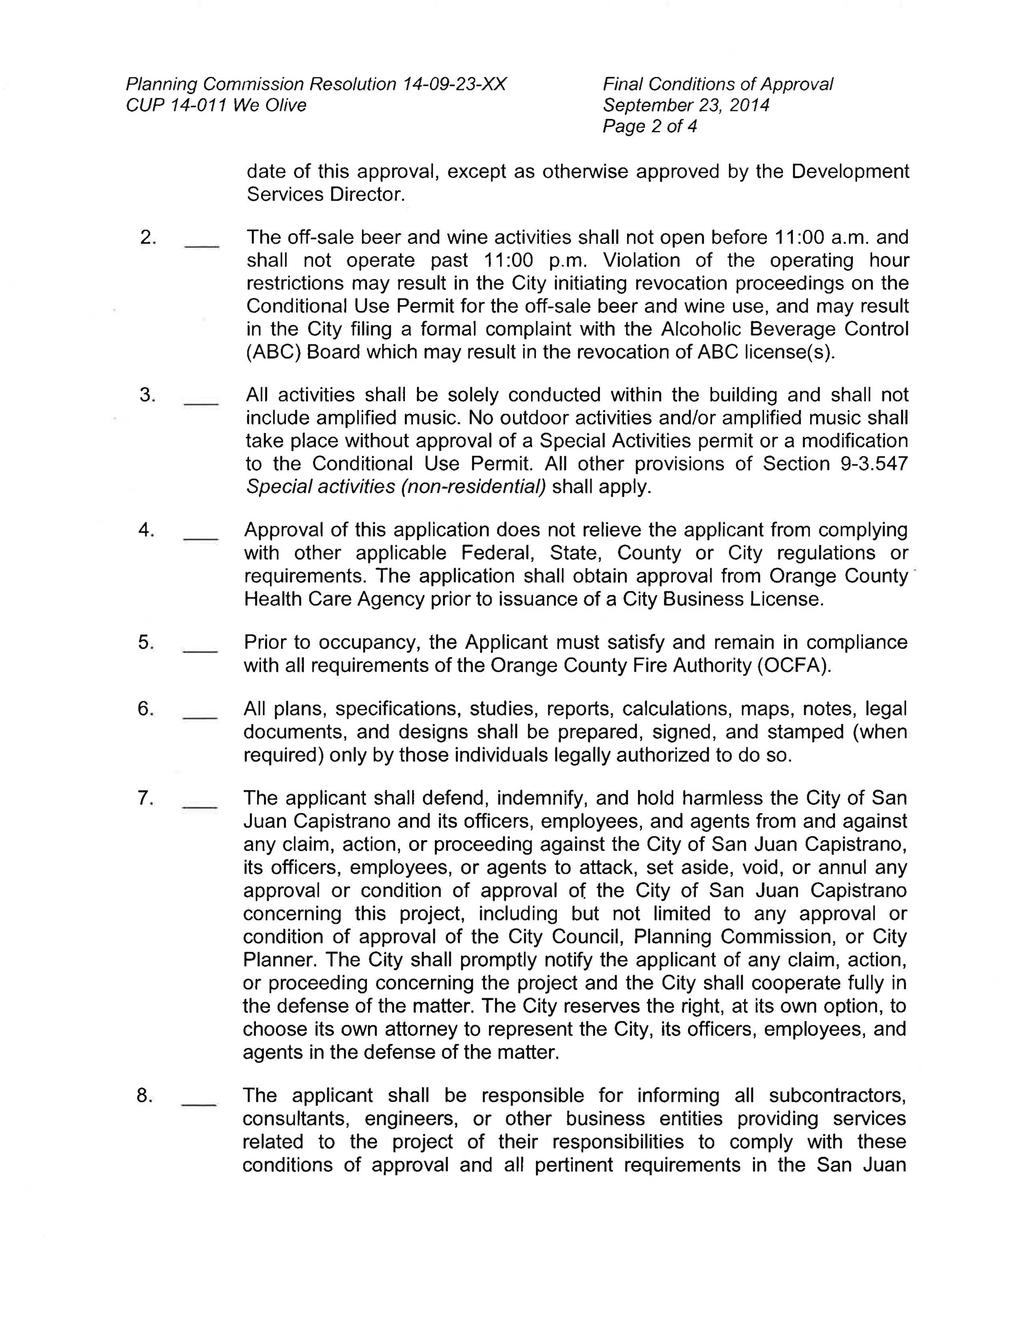 Planning Commission Resolution 14-09-23-XX CUP 14-011 We Olive Final Conditions of Approval Page 2 of4 date of this approval, except as otherwise approved by the Development Services Director. 2. The off-sale beer and wine activities shall not open before 11:00 a.